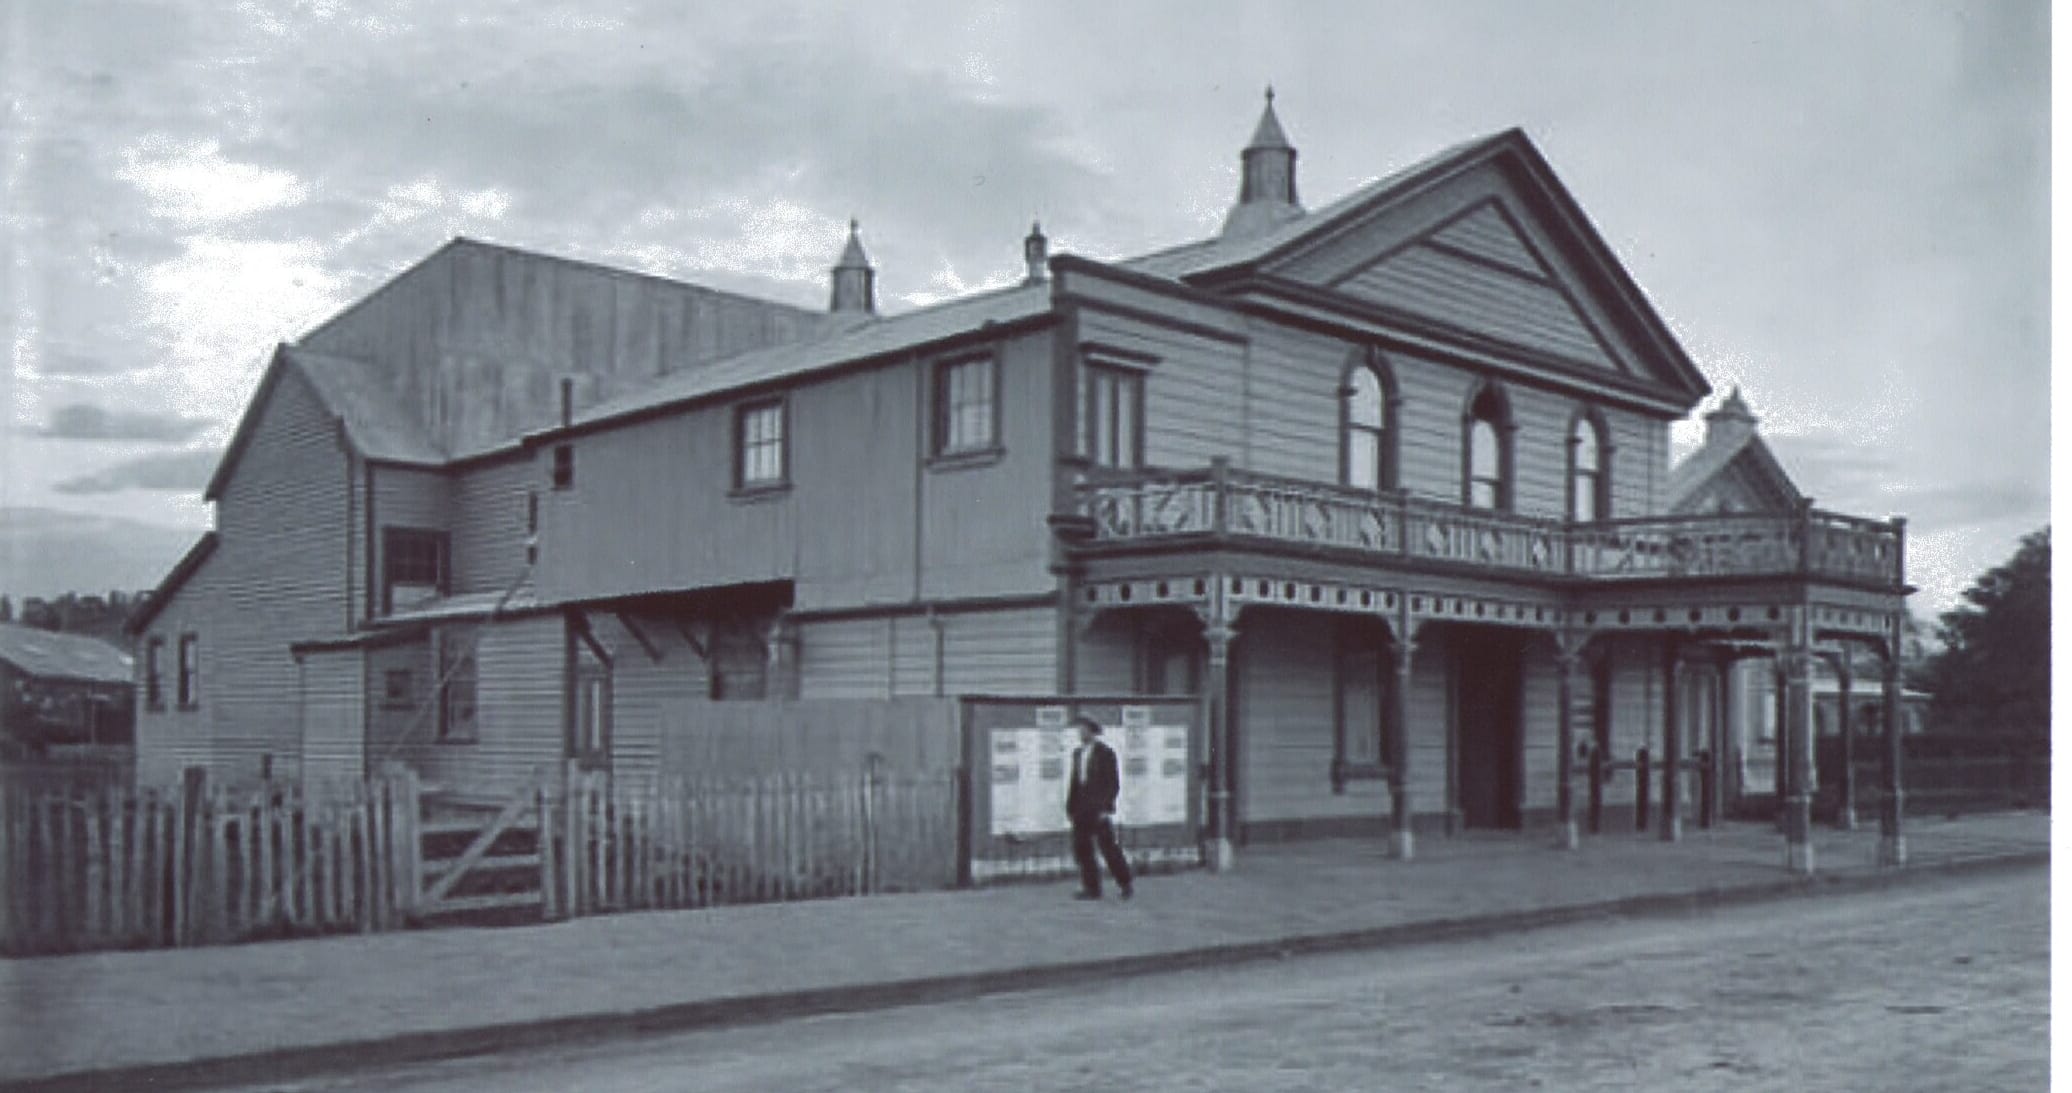 The Theatre Royal in Nelson, 1917